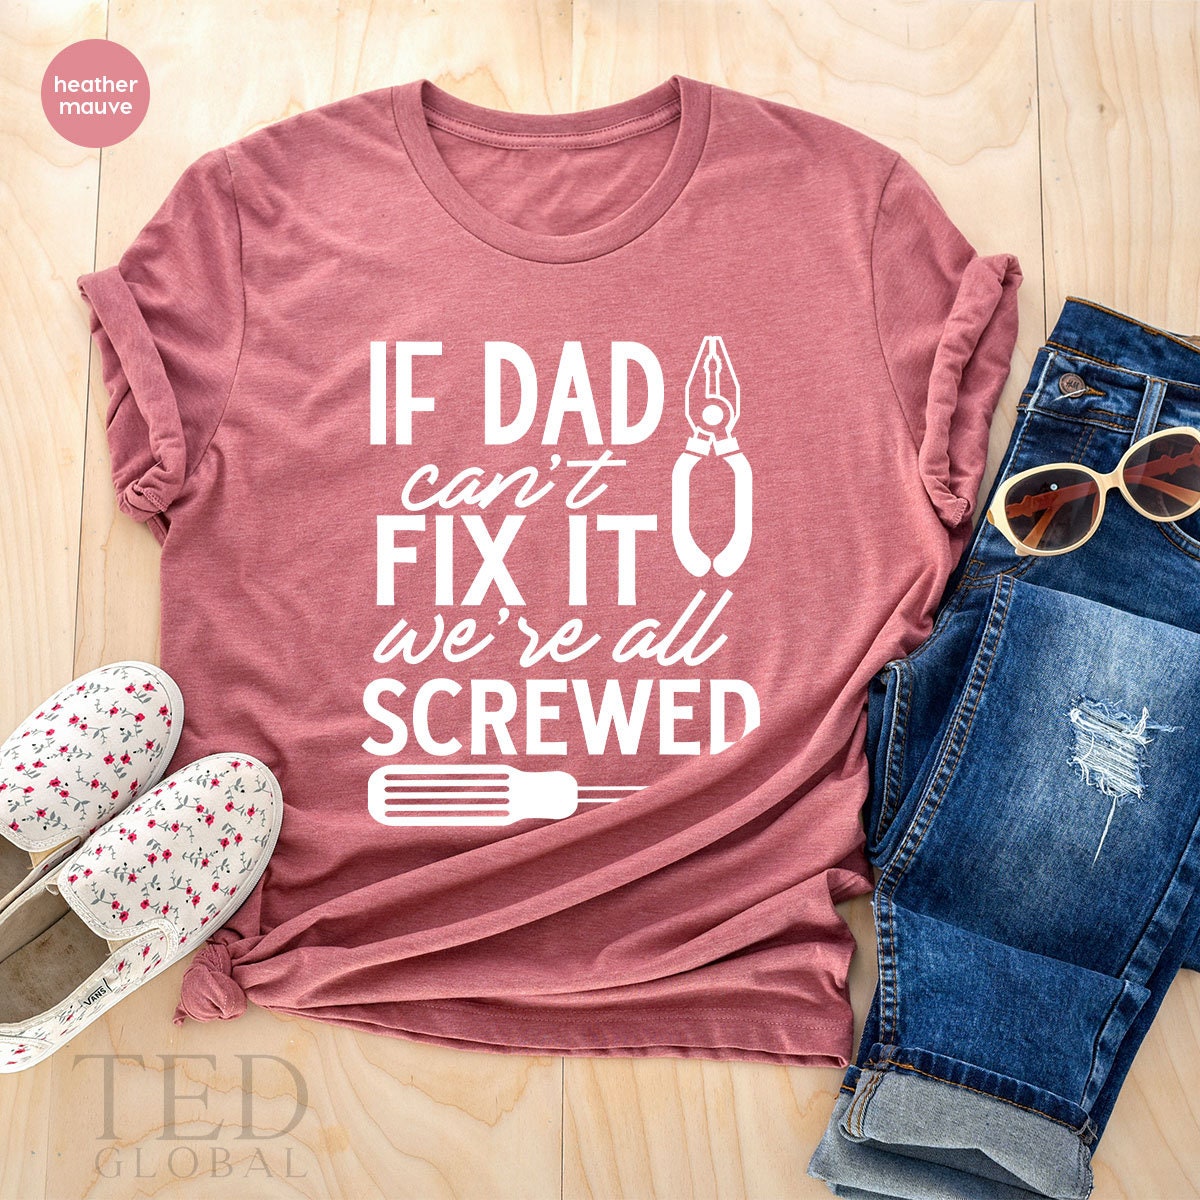 Funny Dad Shirt, Handyman T Shirt, Carpenter TShirt, Woodworker Shirt, Gift For Dad, If Dad Cant Fix It We Are All Screwed,Handyman Dad Gift - Fastdeliverytees.com